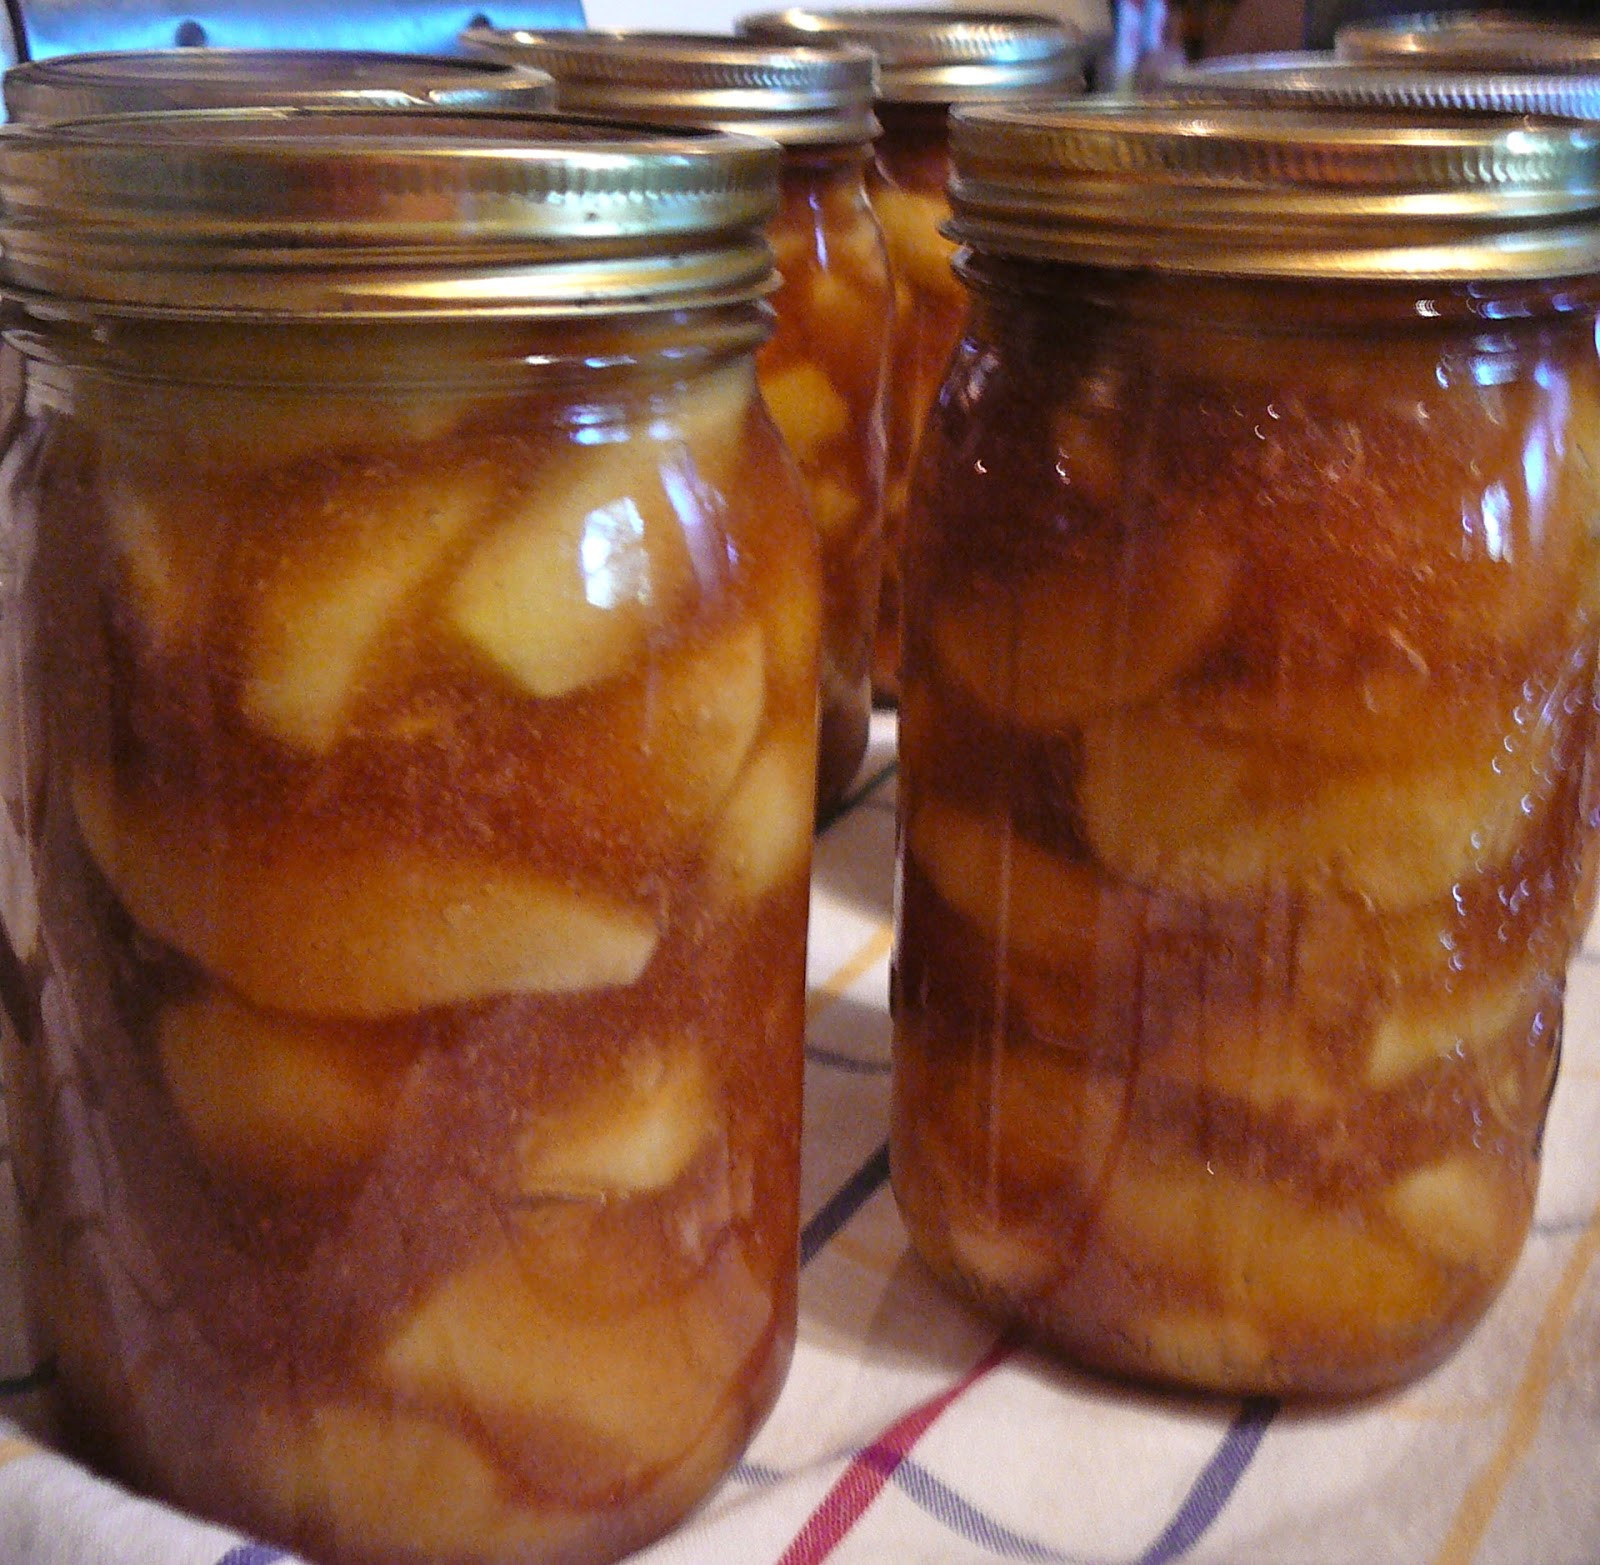 Apple Pie Filling Canning
 The Hidden Pantry Canning Apple Pie Filling my revision